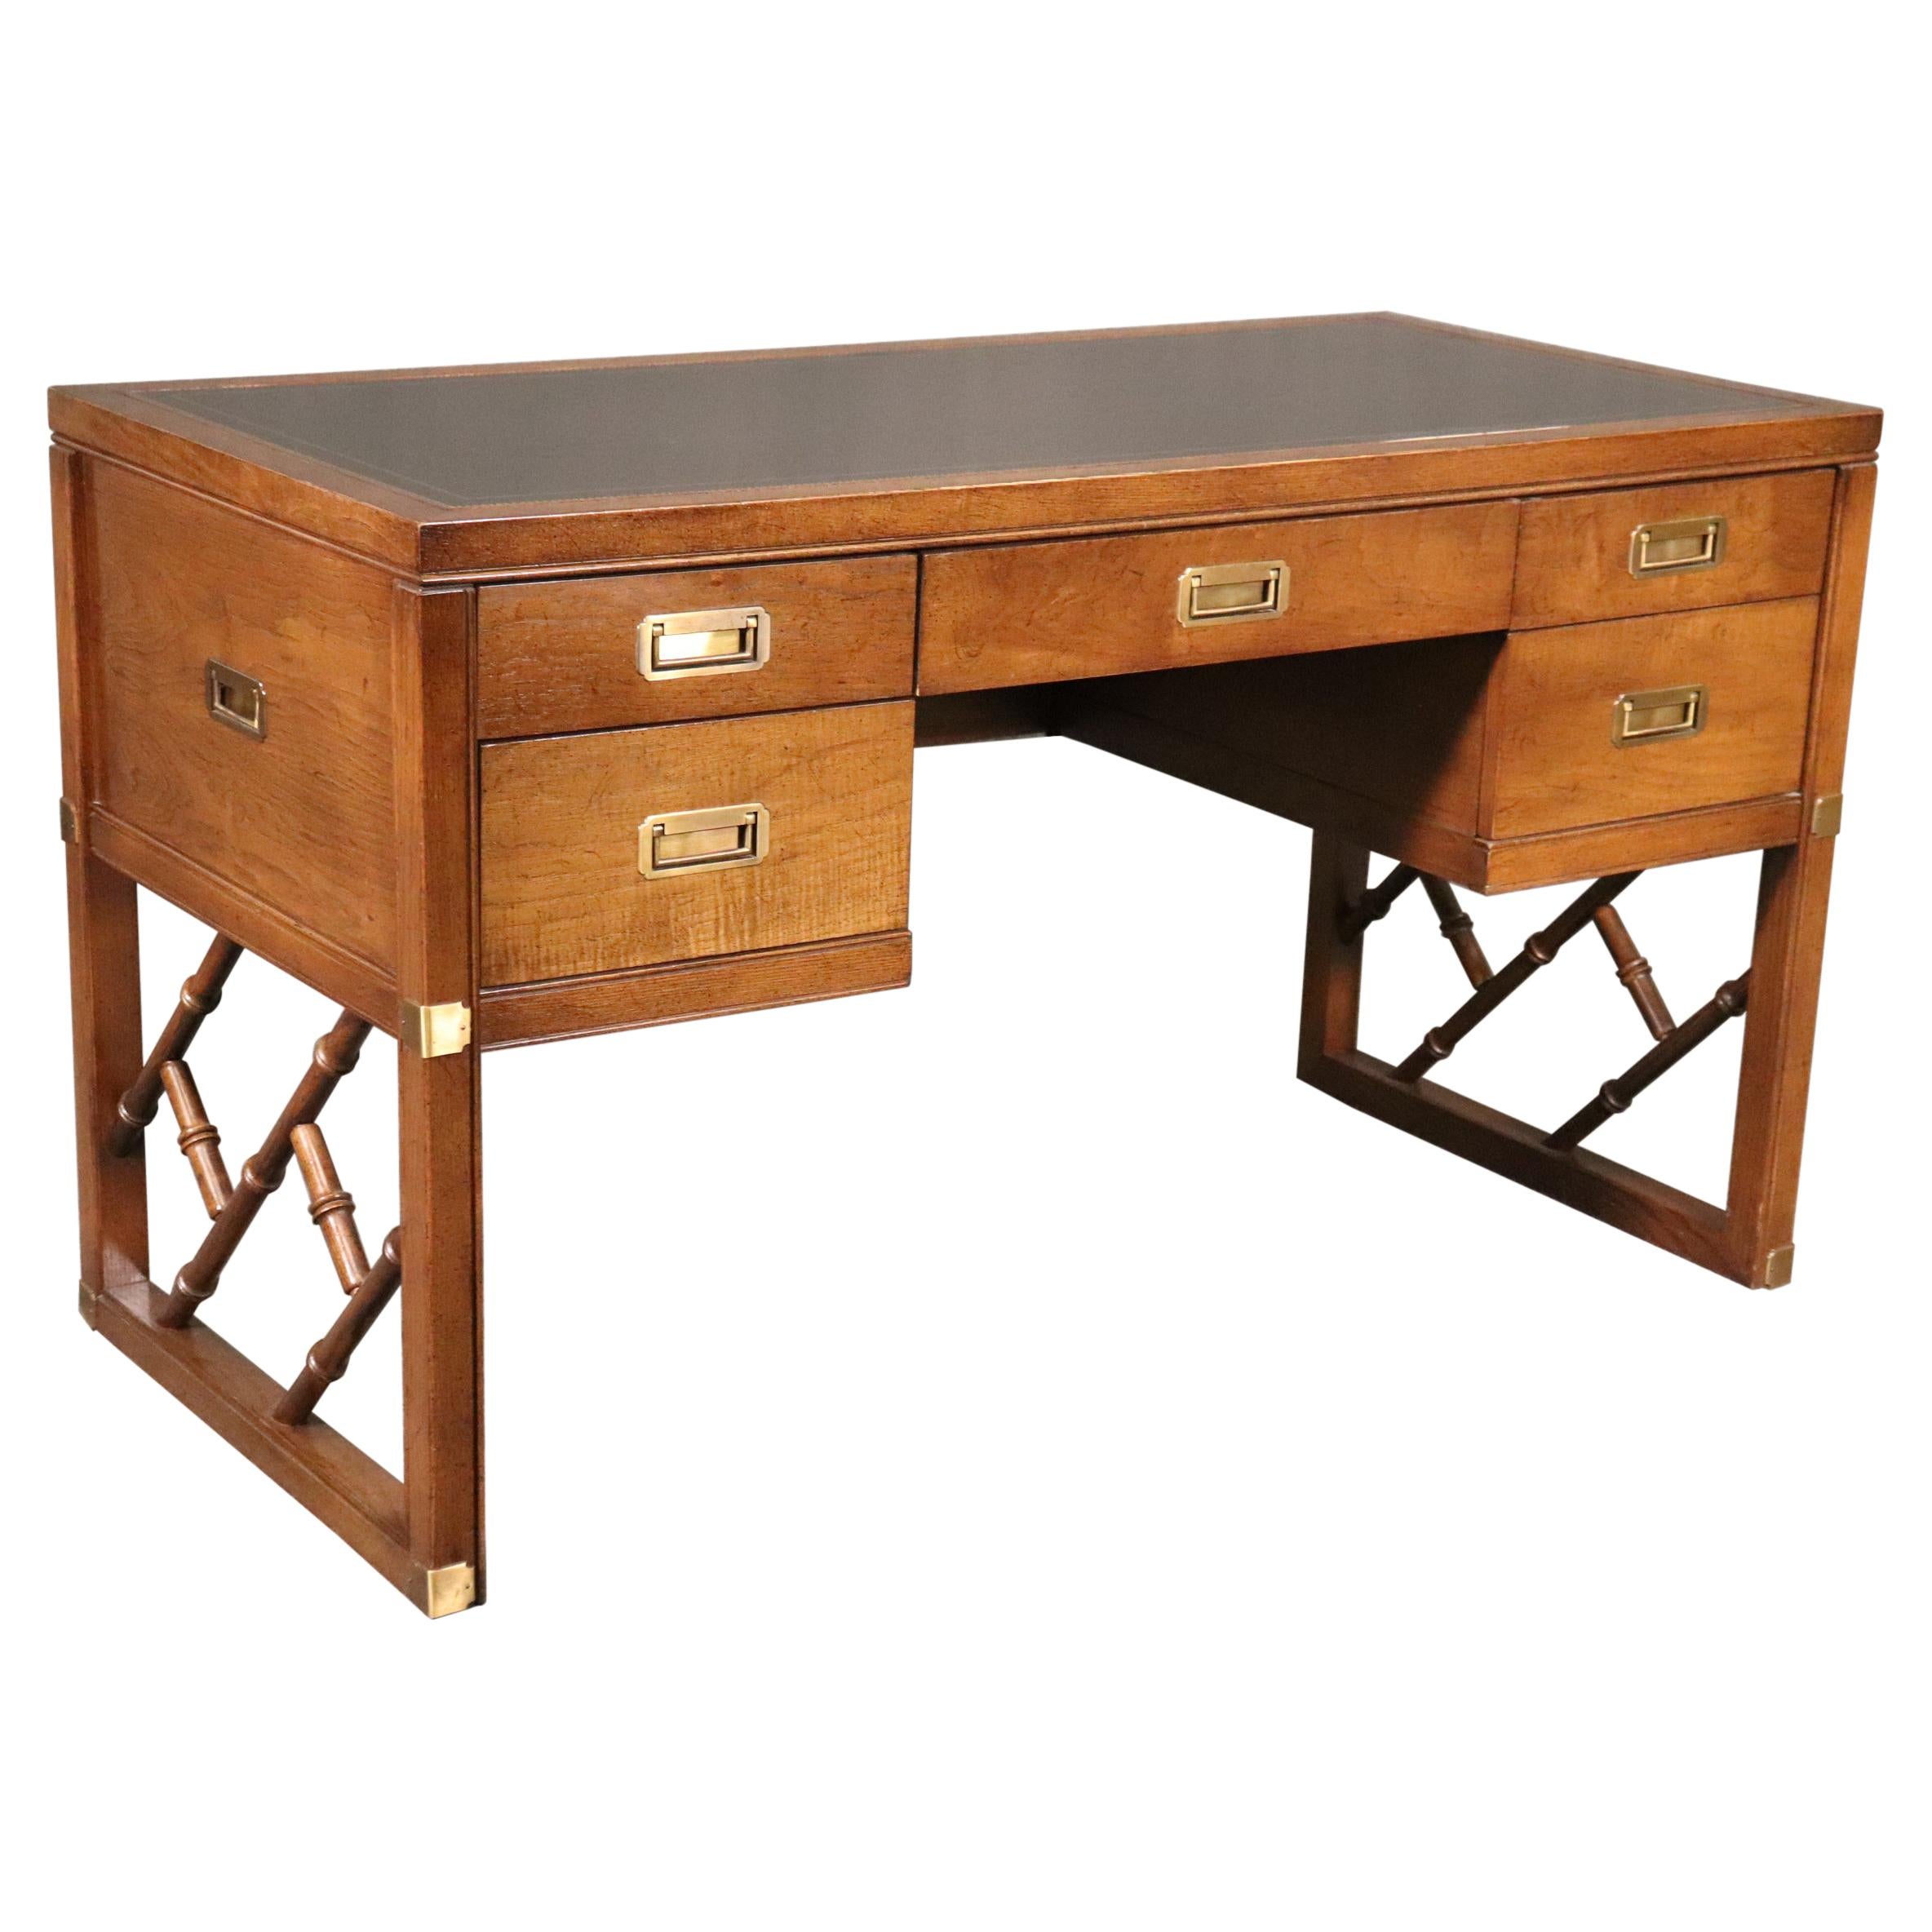 Faux Bamboo and Leather Top Sligh Writing Campaign Style Executive Desk